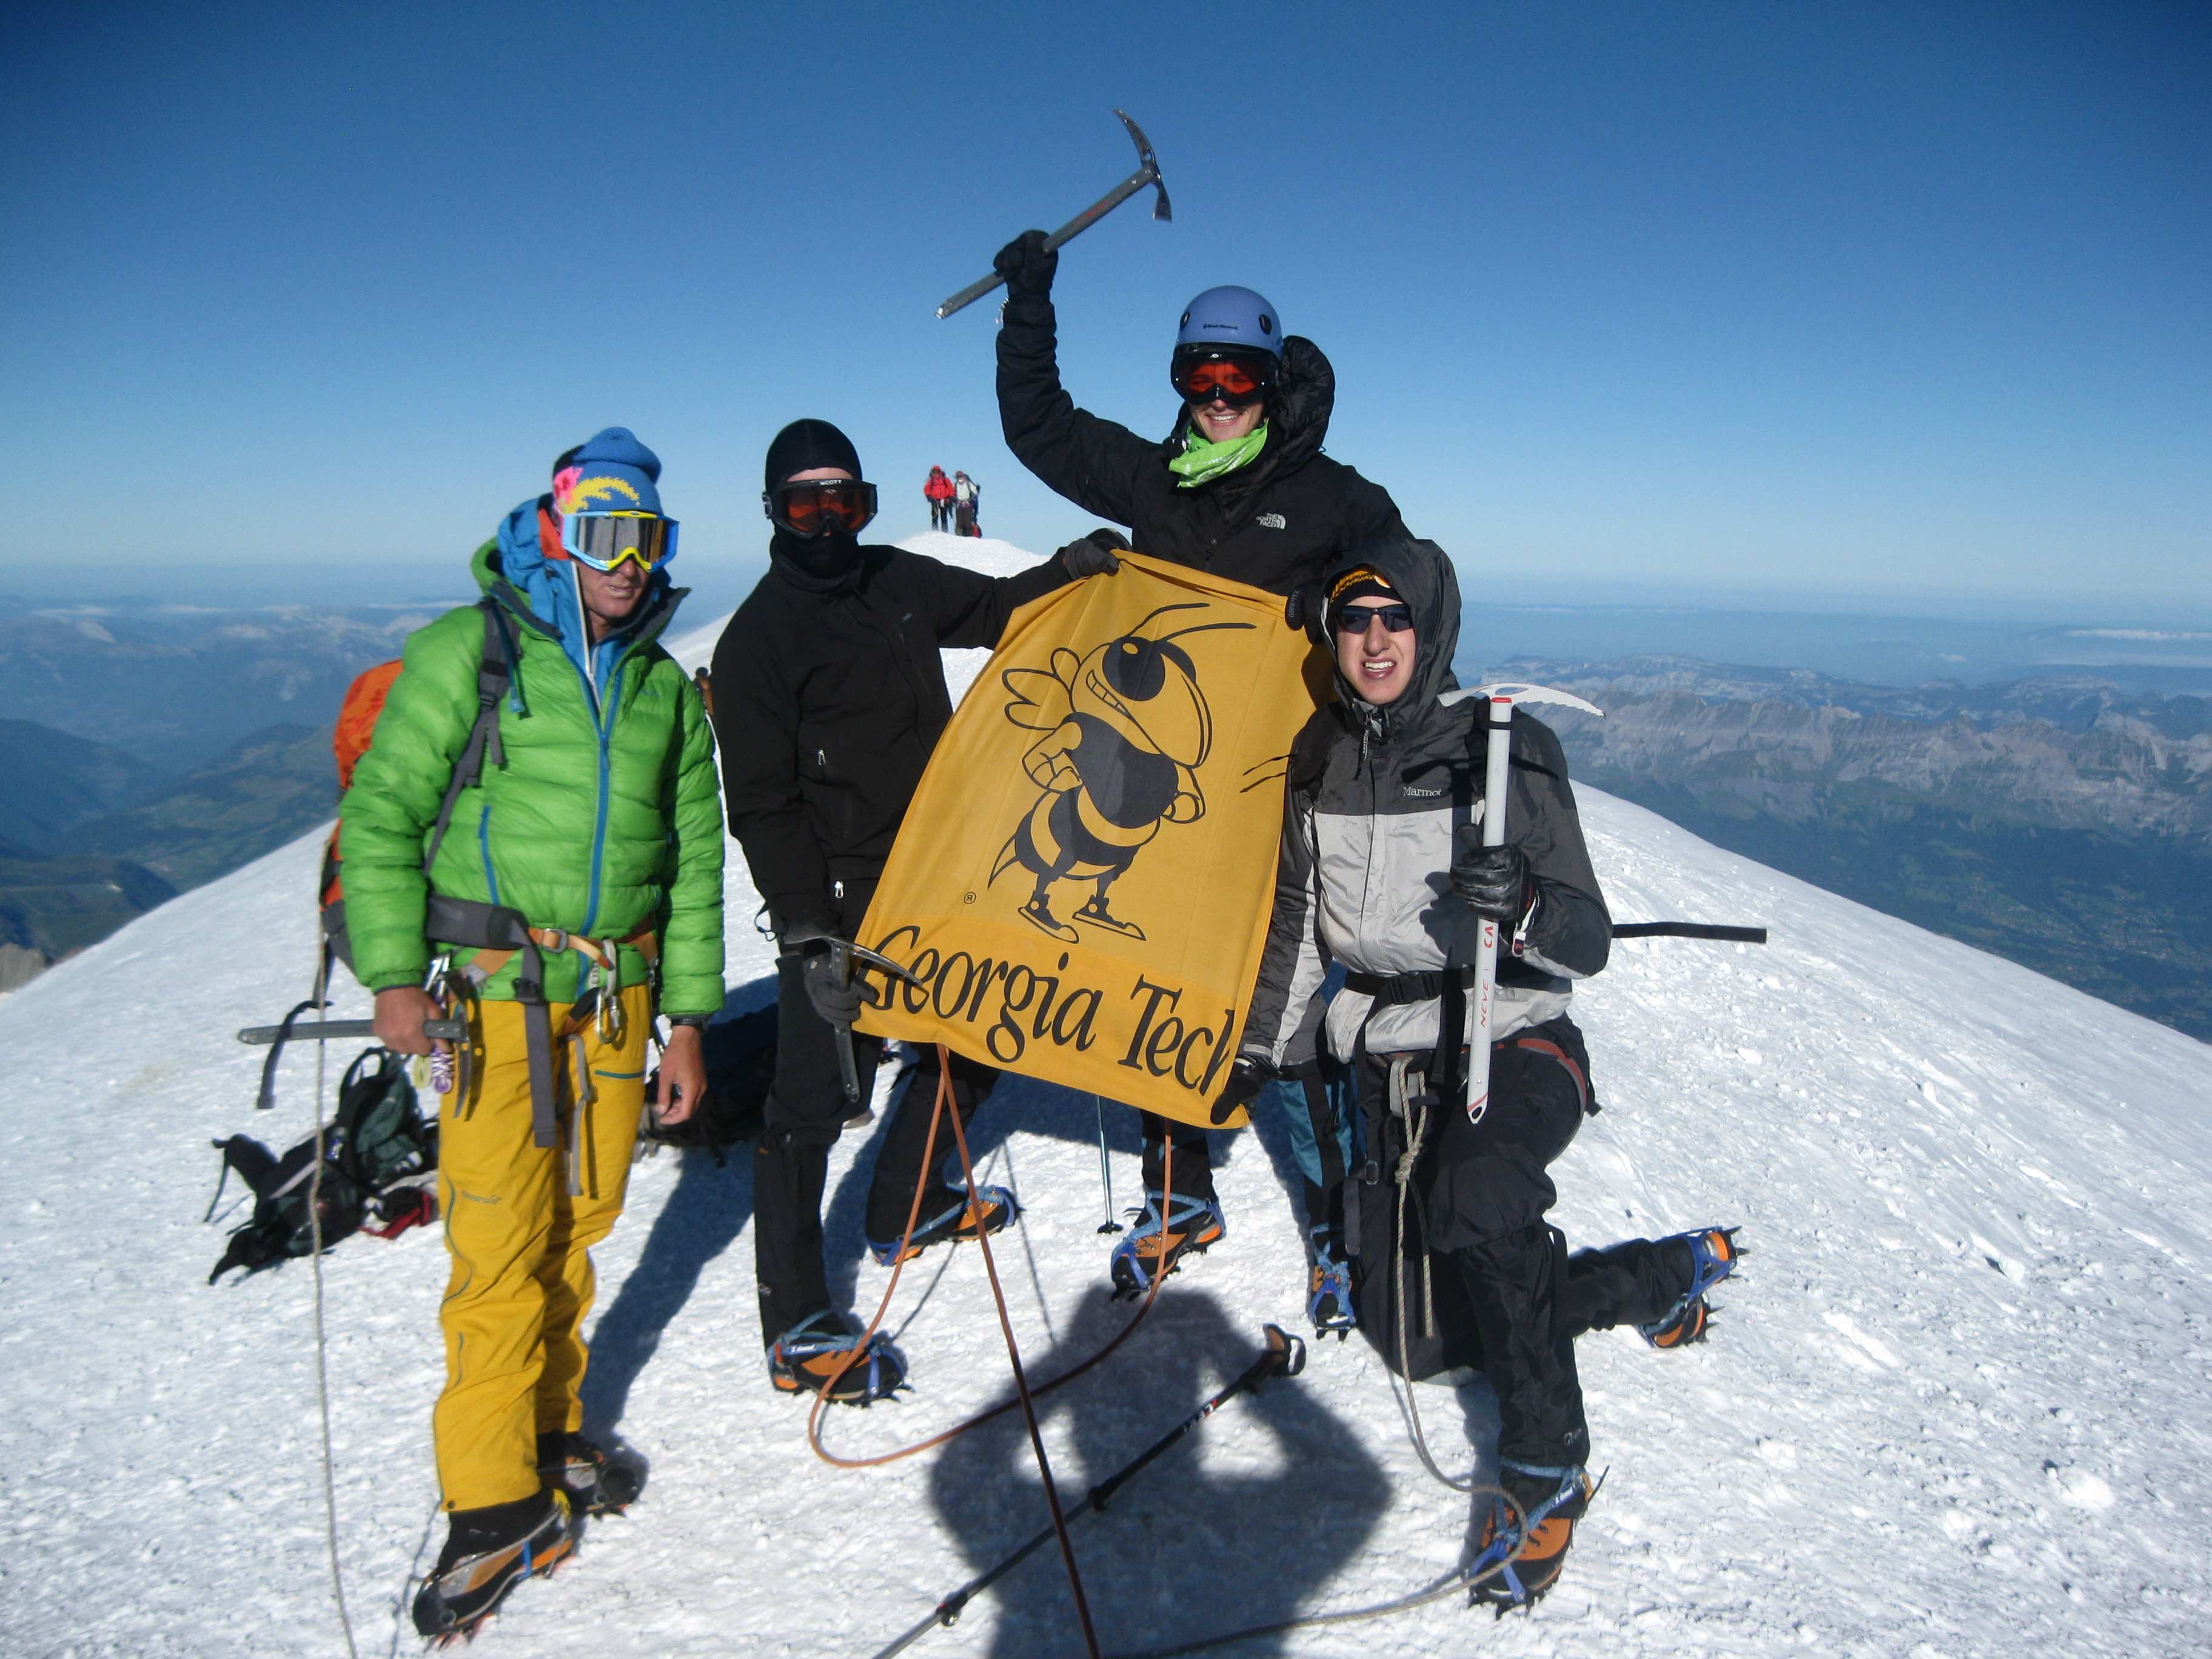 Students participating in an Outdoor Recreation Georgia Tech (ORGT) trip reach the summit of Mont Blanc in France.